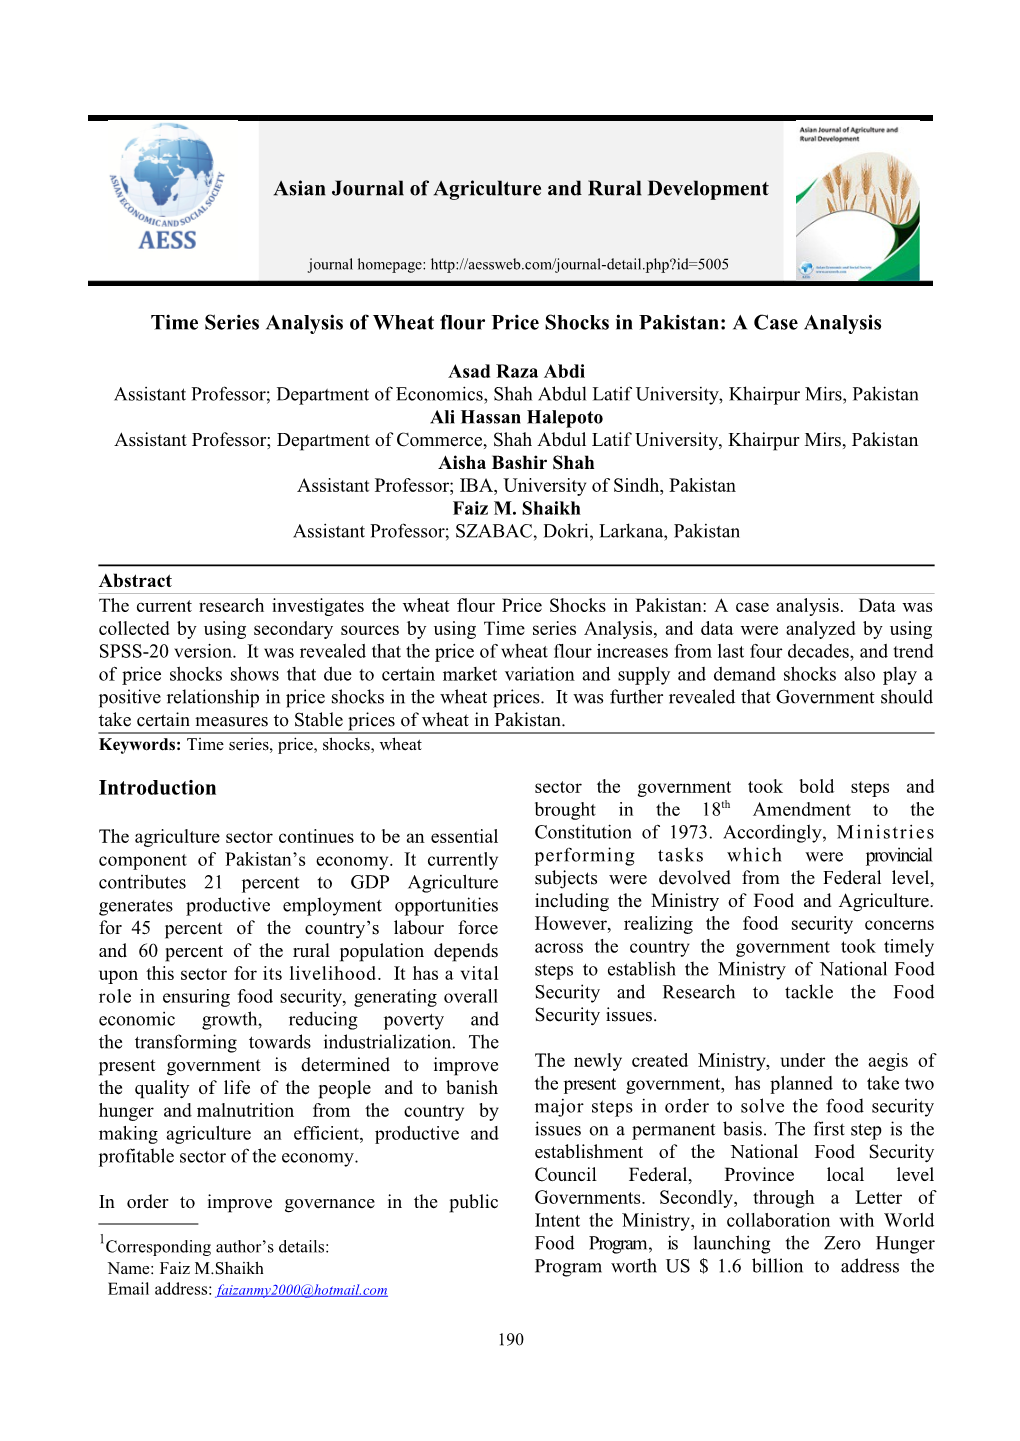 Asian Journal of Agriculture and Rural Development, 3(10)2013: 702-708